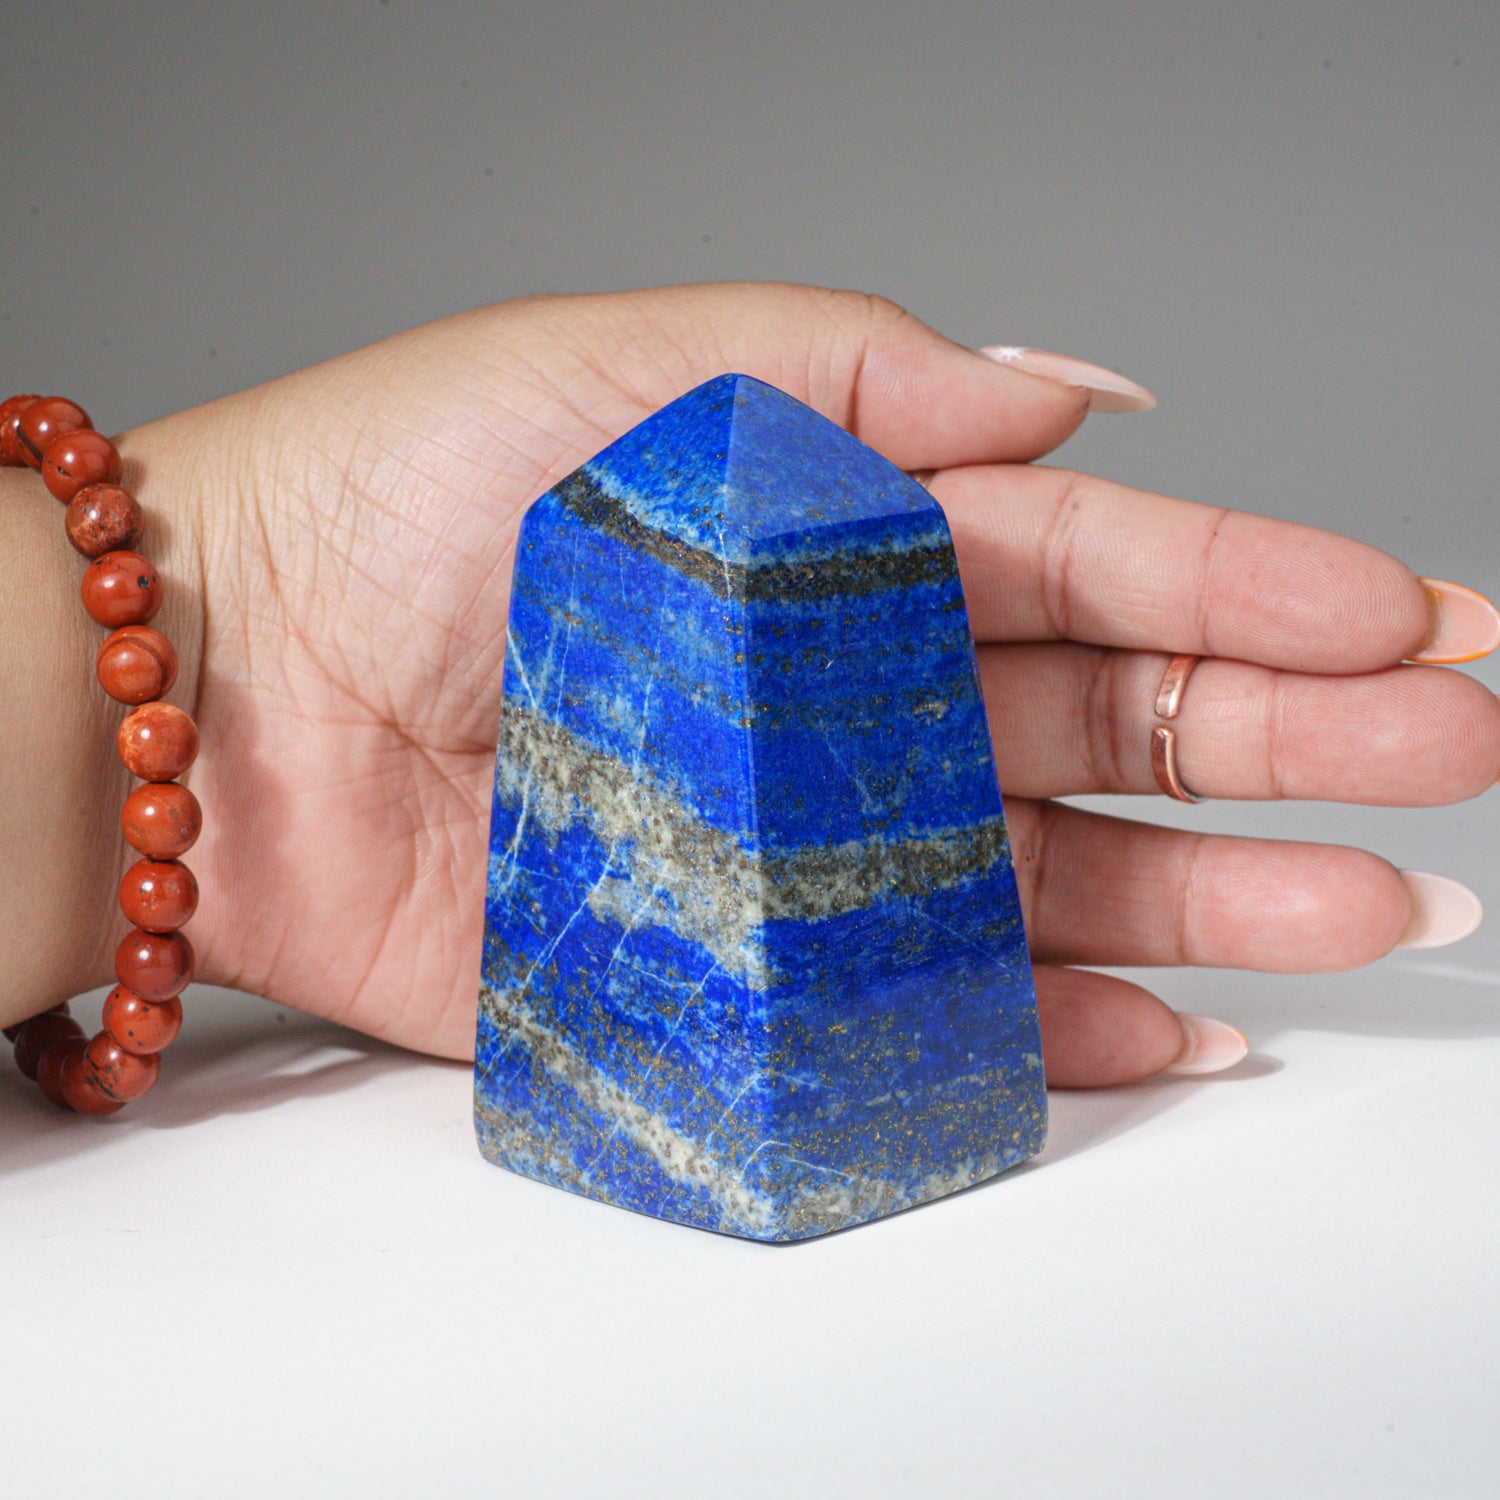 Polished Lapis Lazuli Point from Afghanistan (381.6 grams)